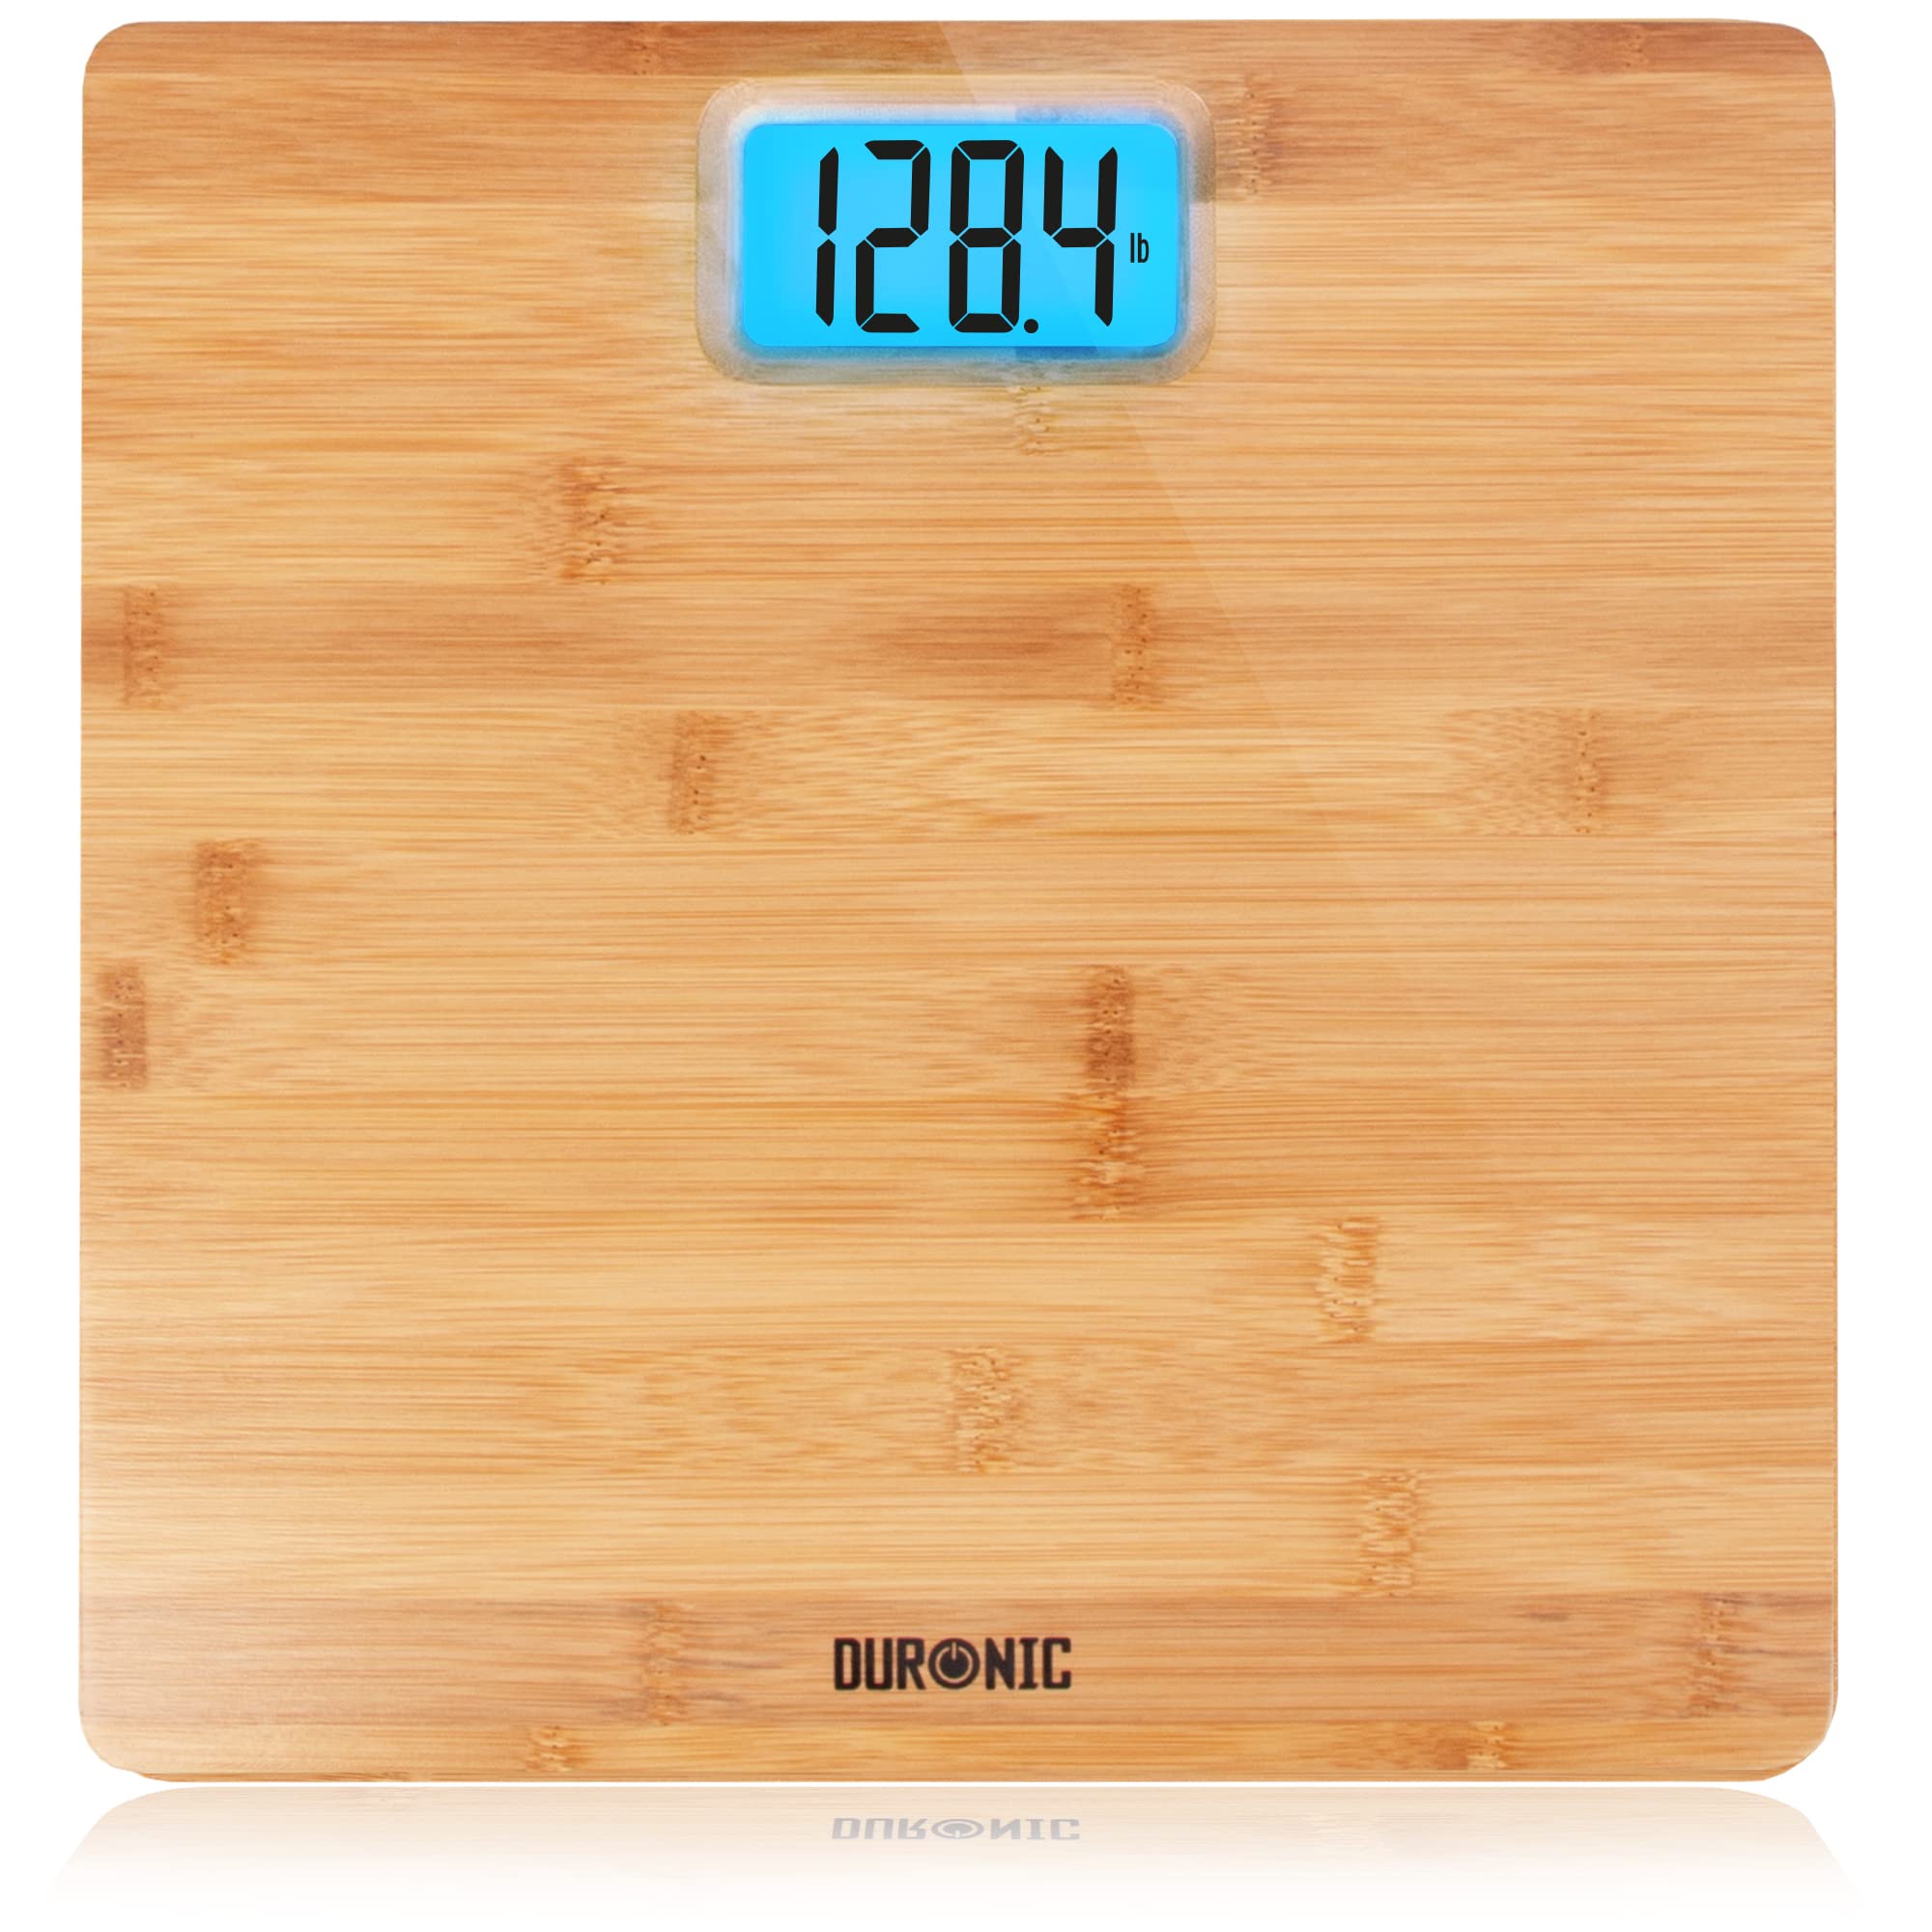 Duronic Digital Bathroom Body Scales BS504 - Measures Weight in Kilograms, Pounds and Stones - Eco-Friendly Bamboo Design, Backlit Screen, Step-On Activation, Precision Sensors, 180kg Capacity